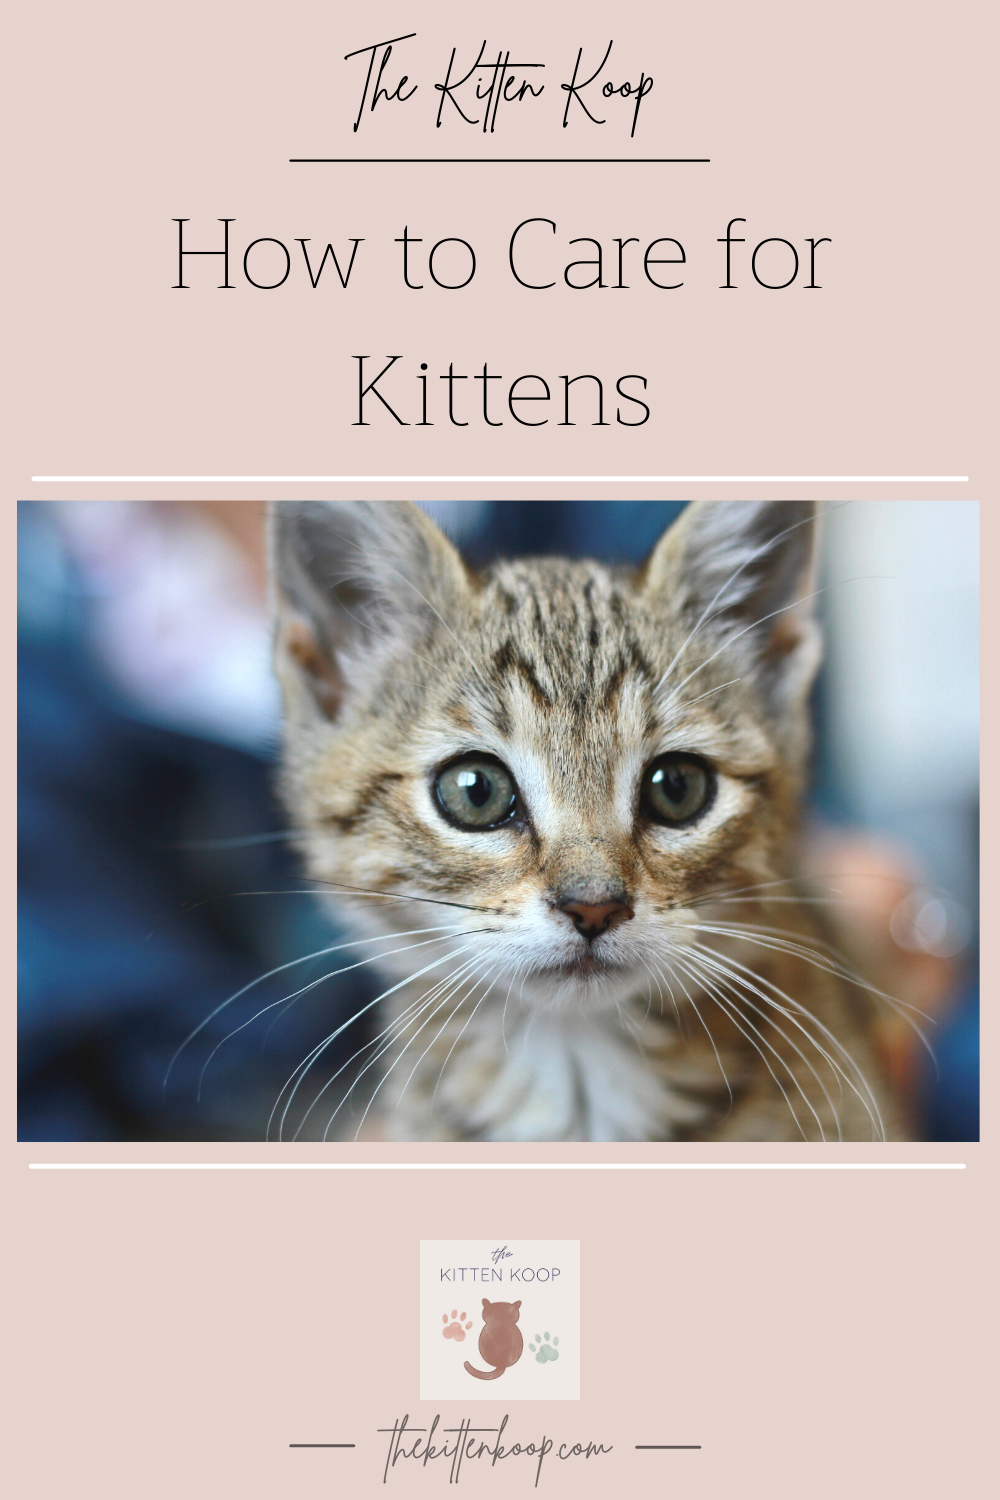 How to Care for Kittens